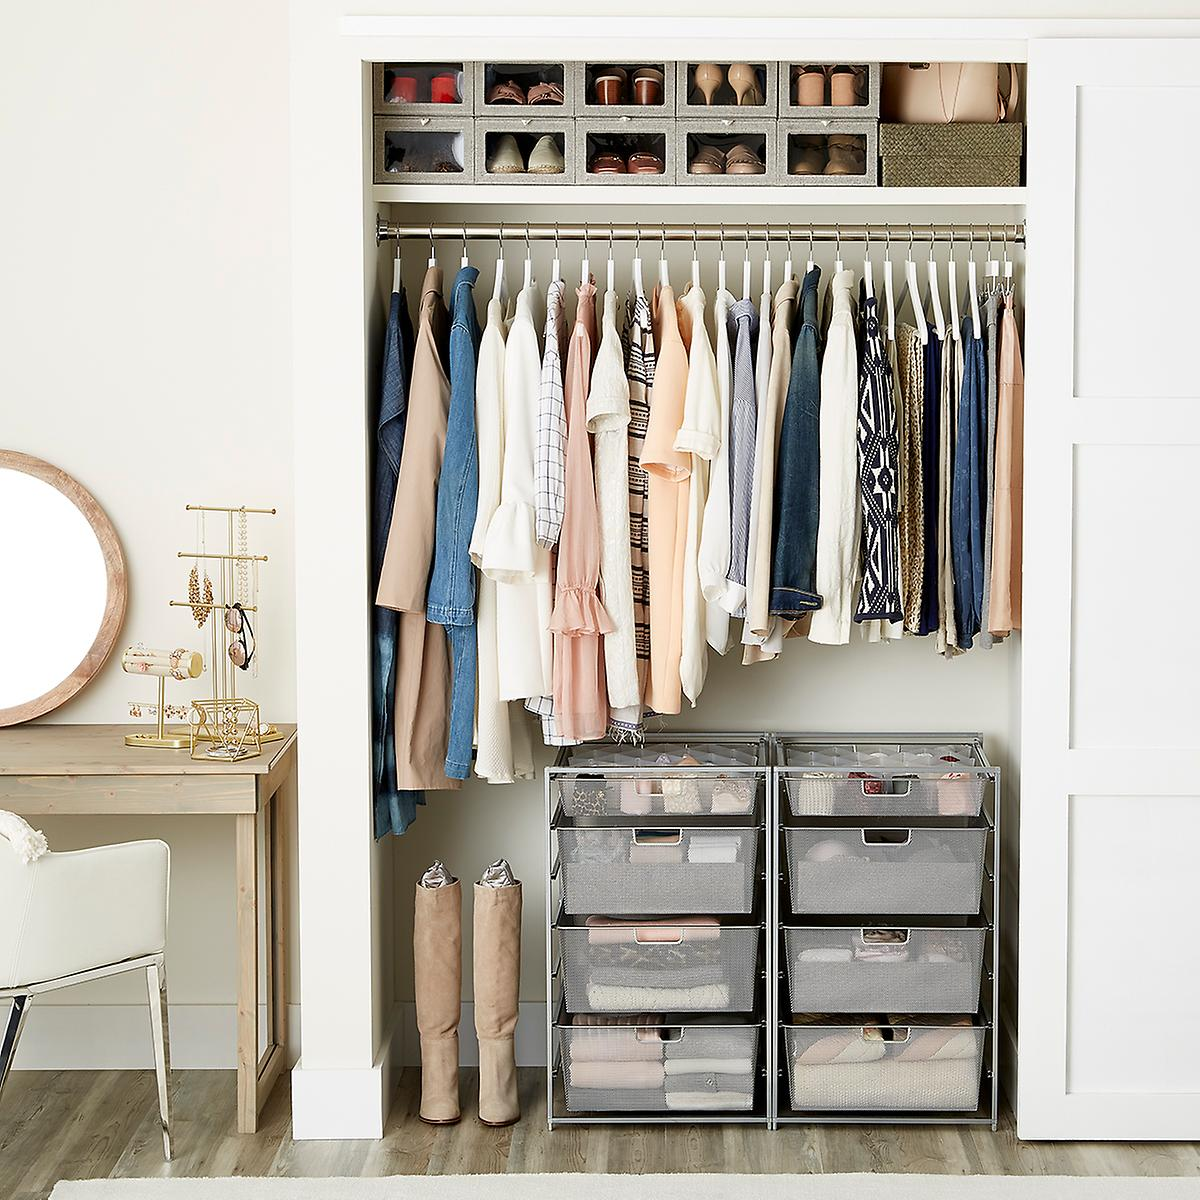 Winter Organizing: Is Your Closet Organized and Ready for a New Year?